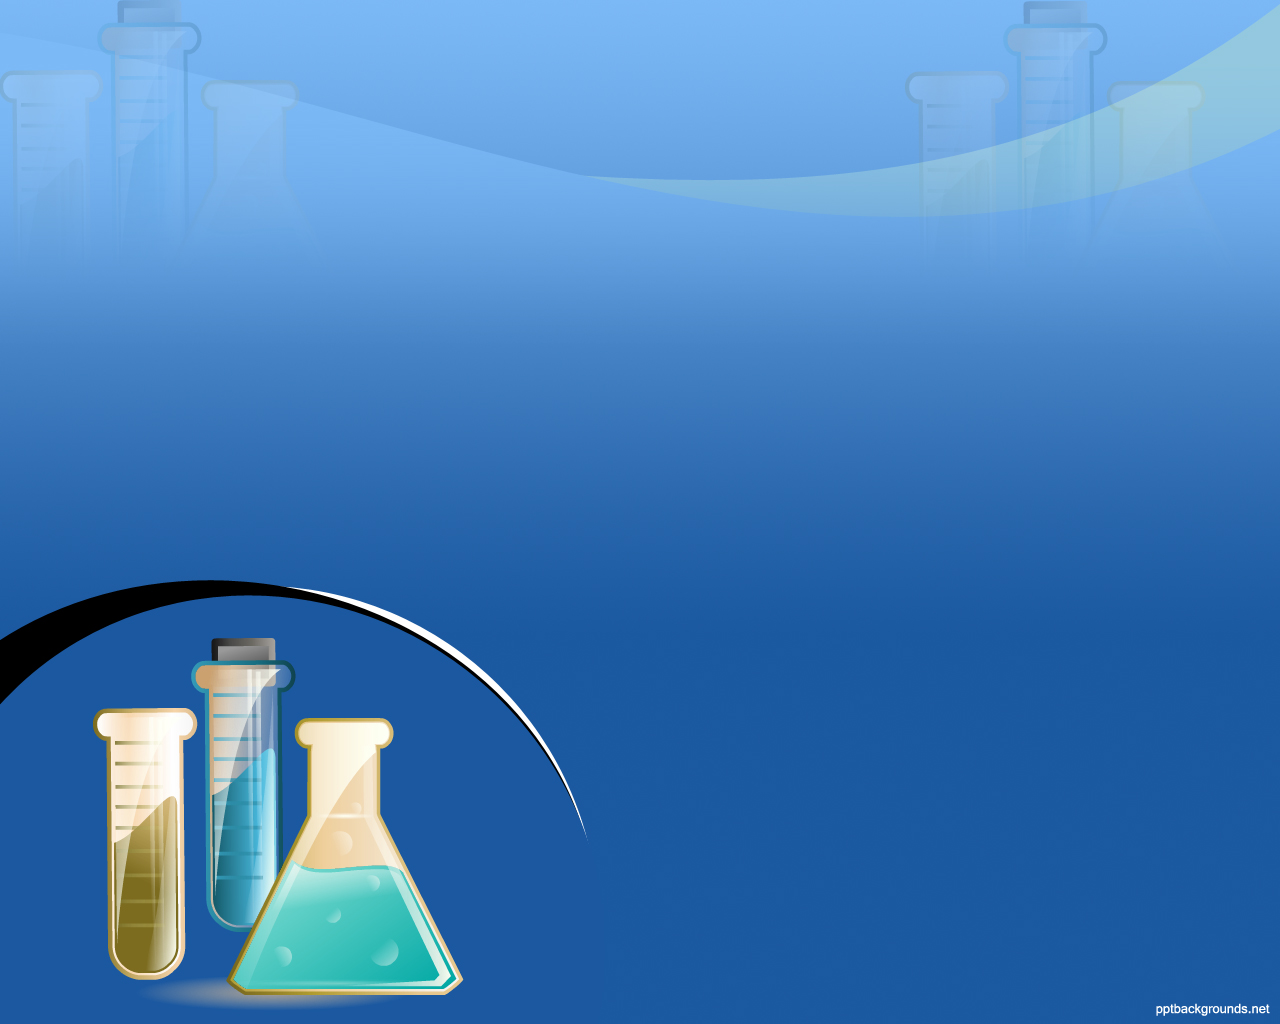  Science PowerPoint BackgroundsWallpapers Download   PPT Backgrounds